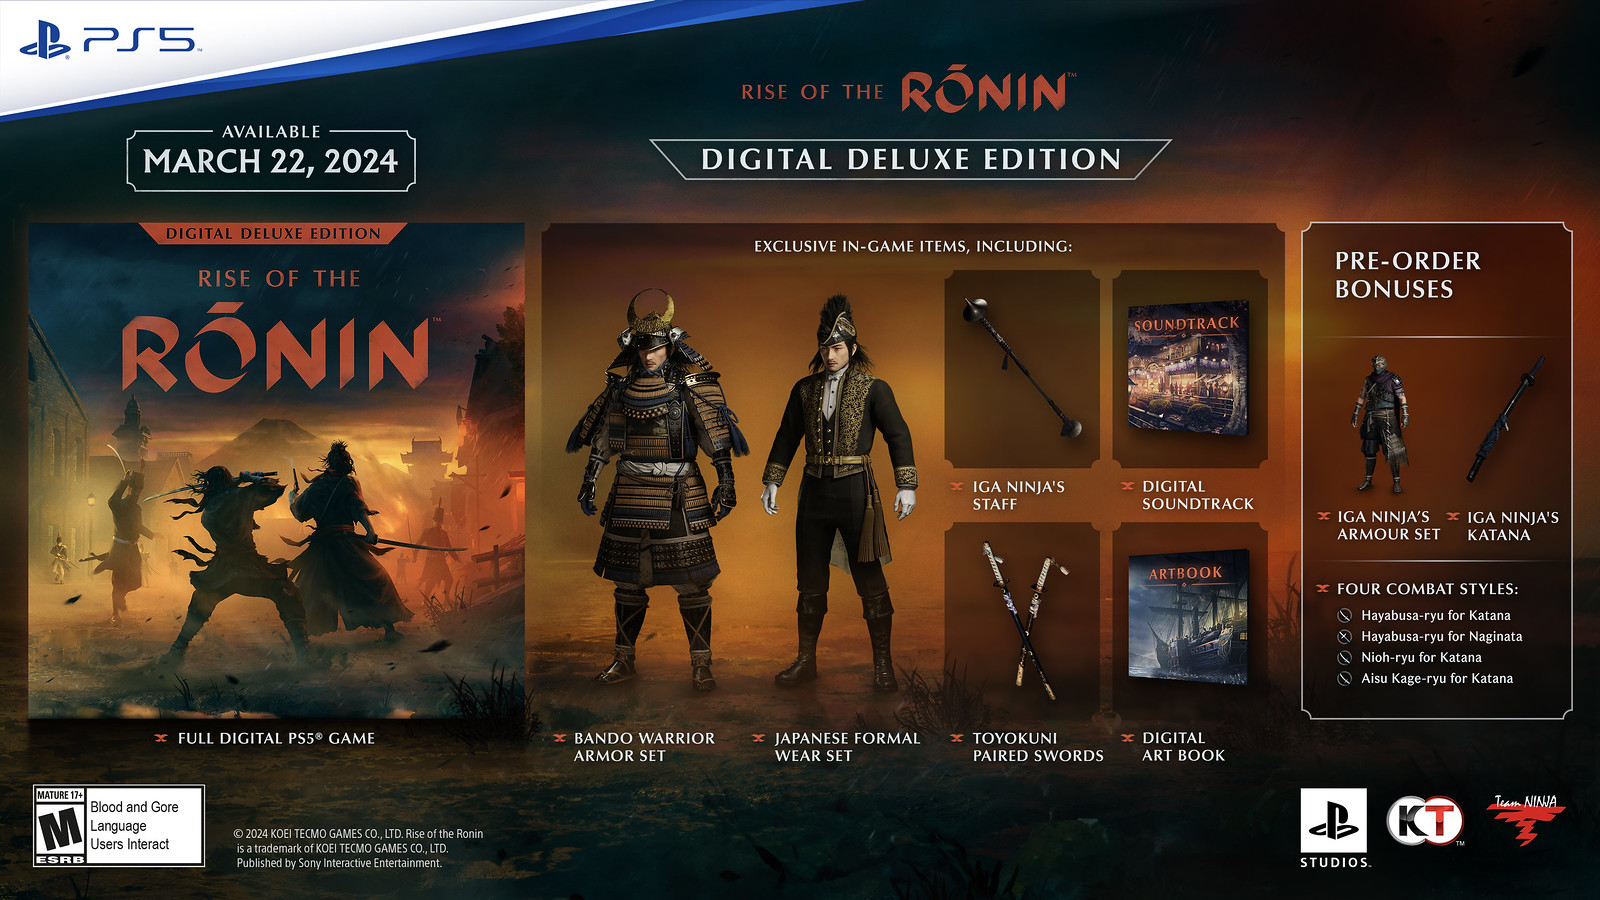 Rise of the Ronin arrives only on PS5 March 22 – PlayStation.Blog